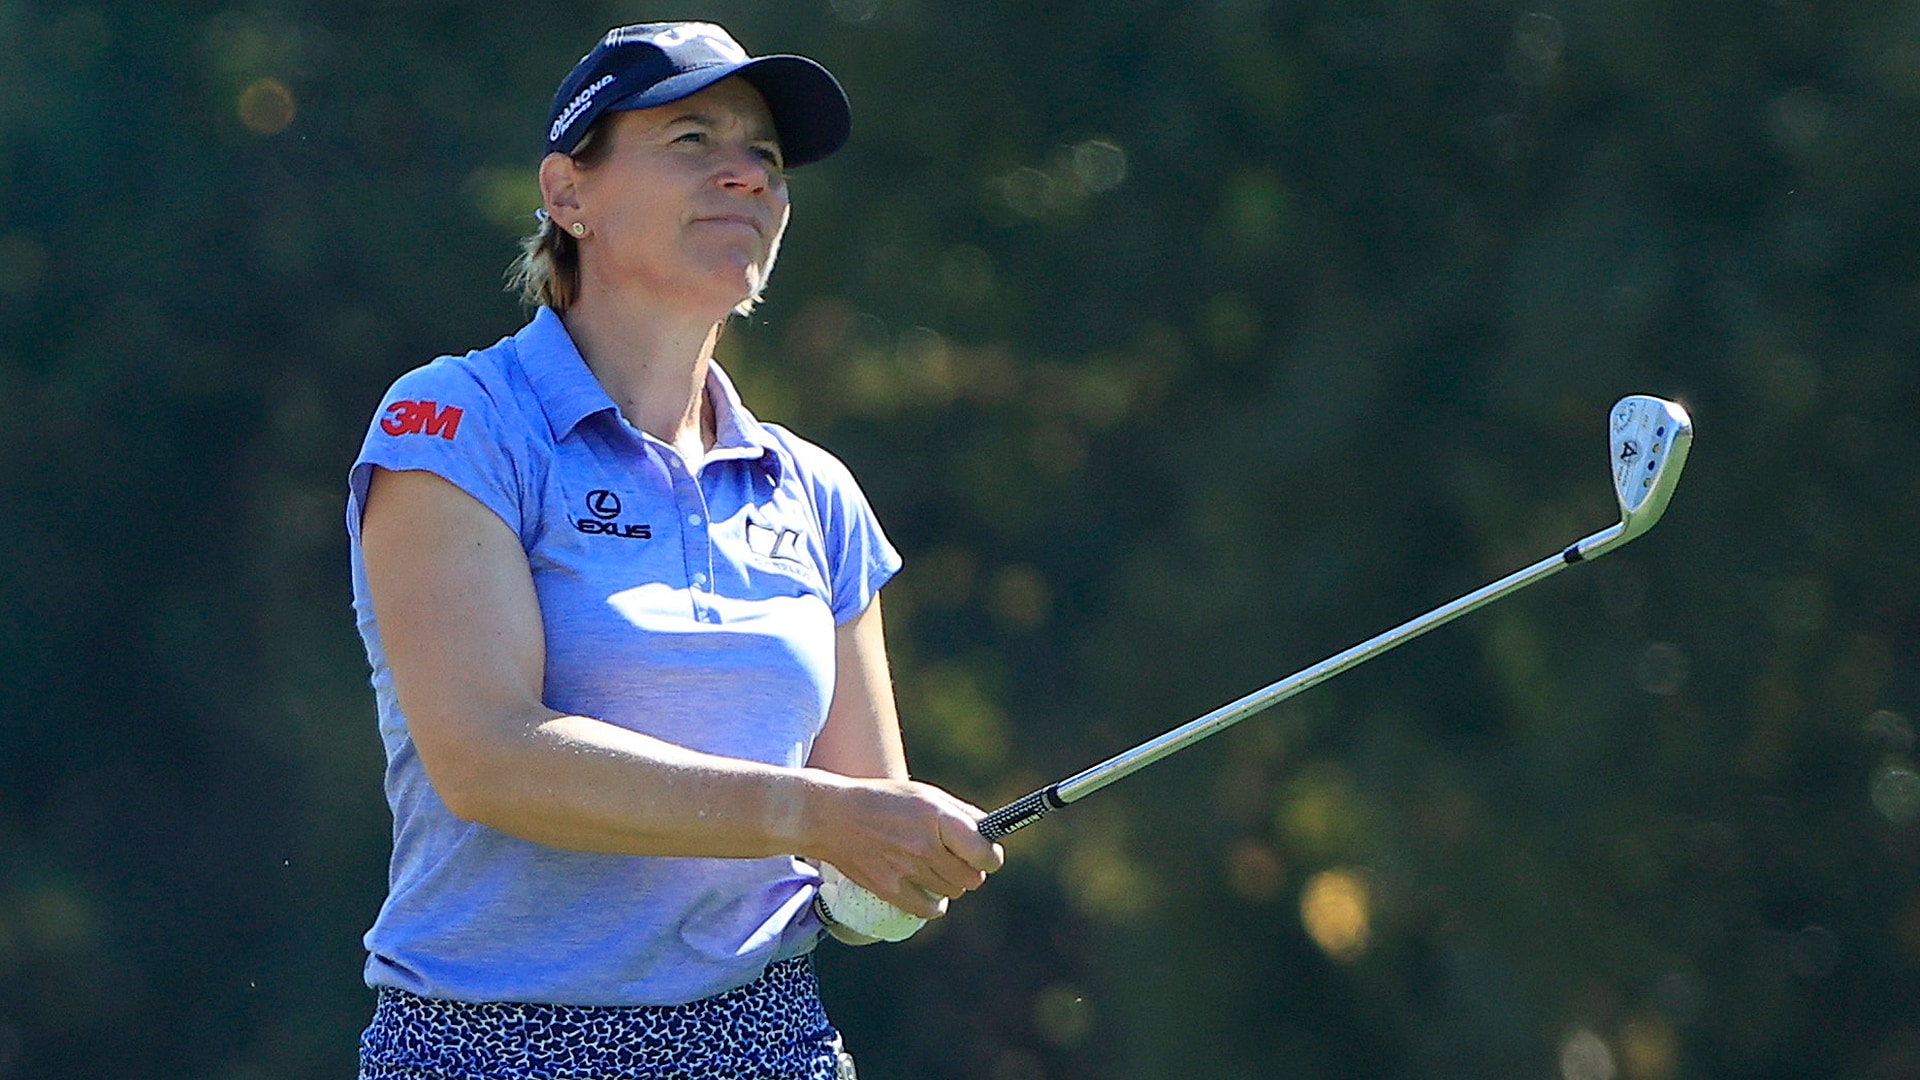 Pay it forward: Annika Sorenstam passing along advice to younger players